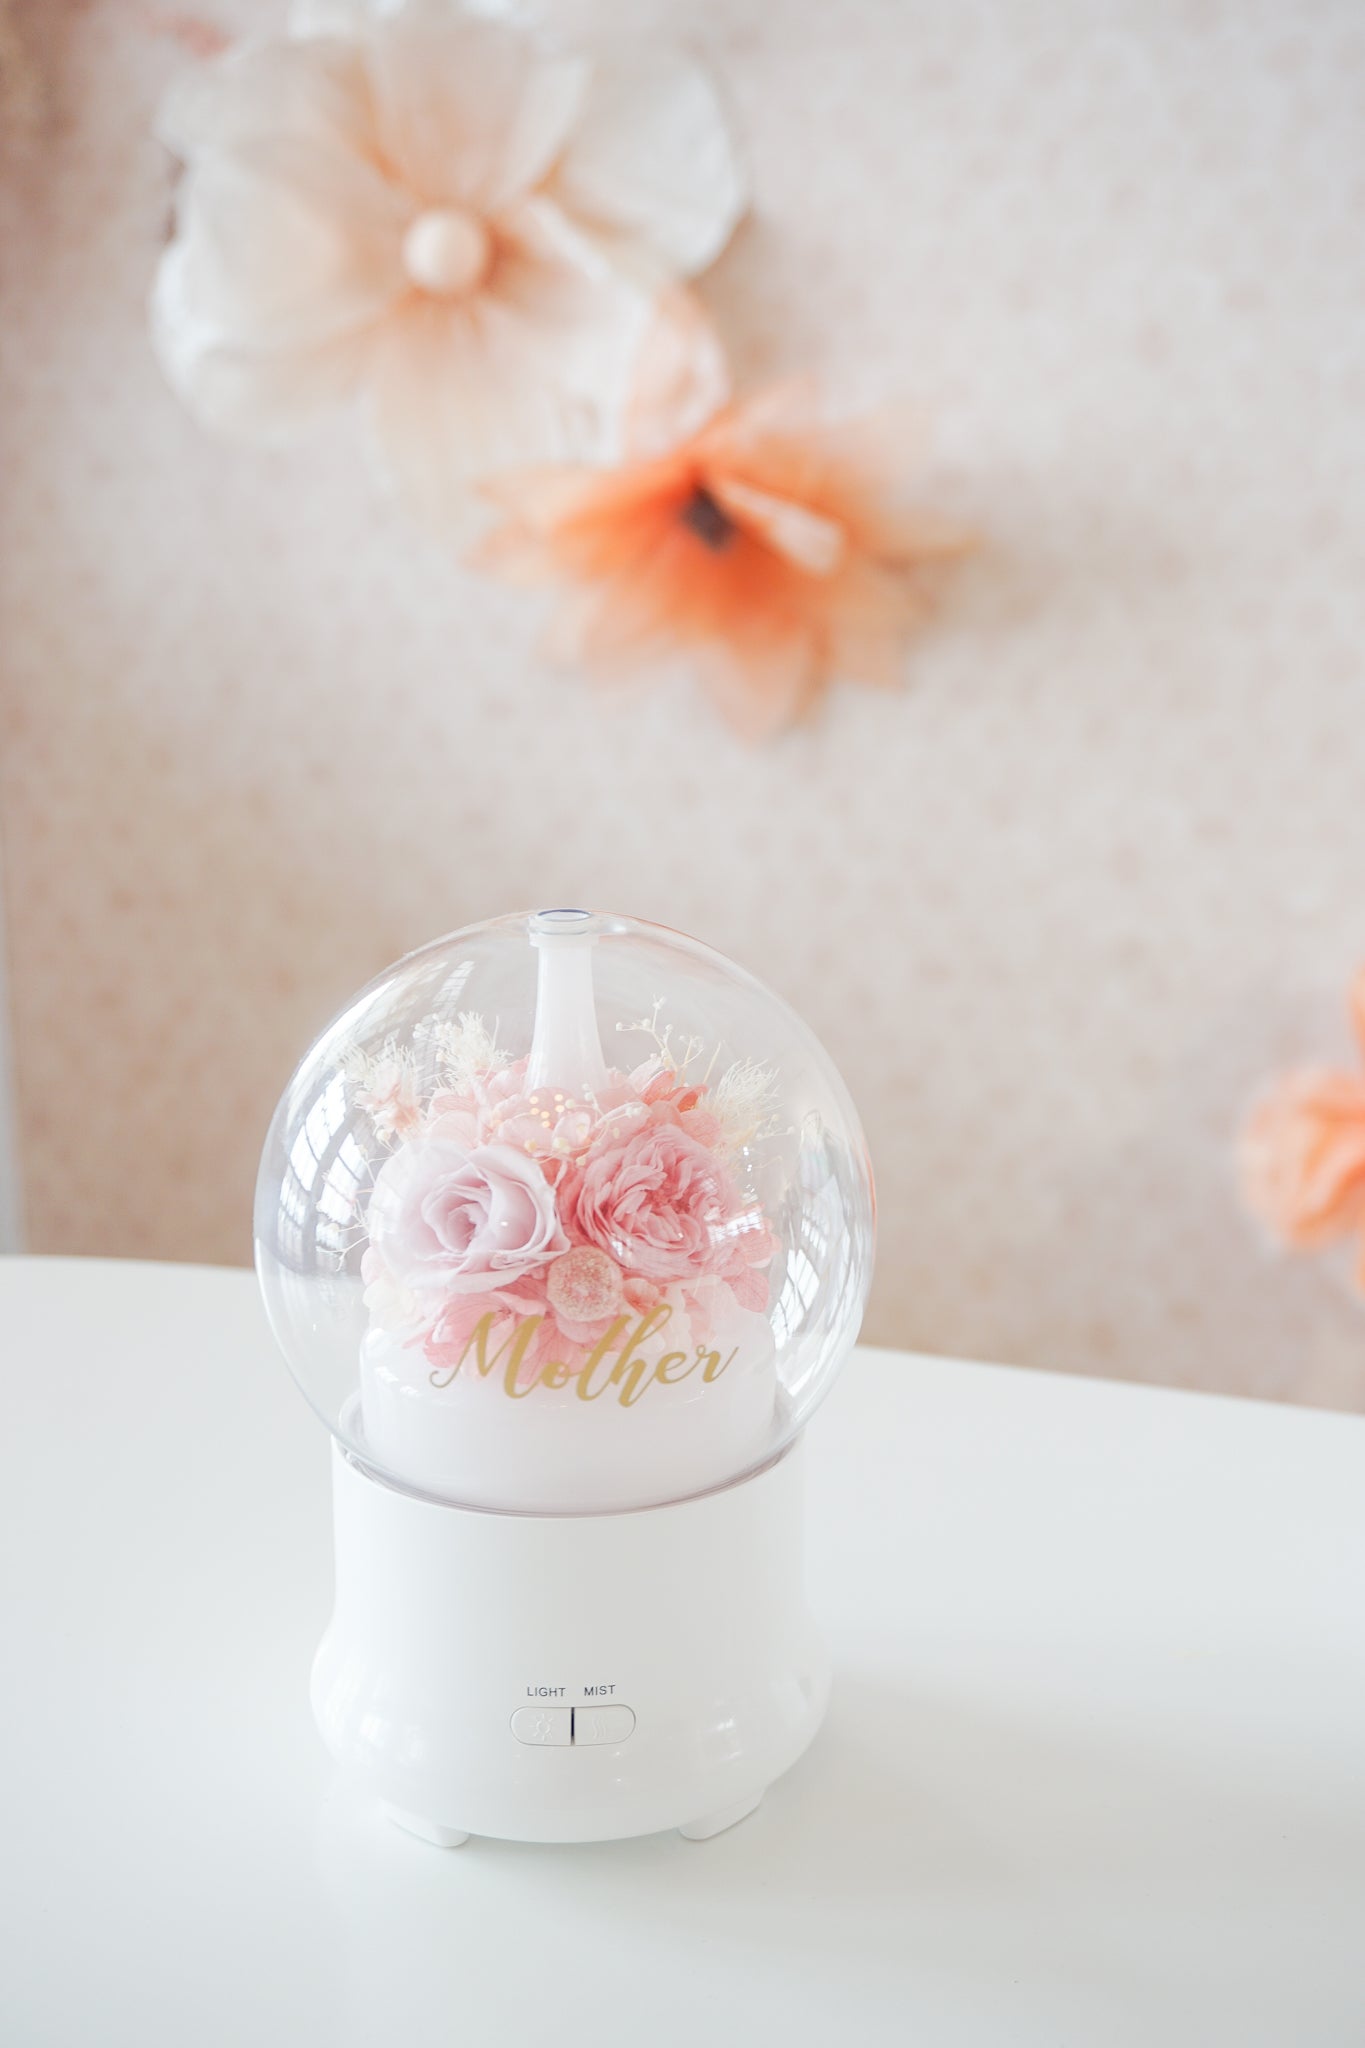 Customised Aroma Diffuser/Humidifier with Pink Preserved Flowers, Light and Mist